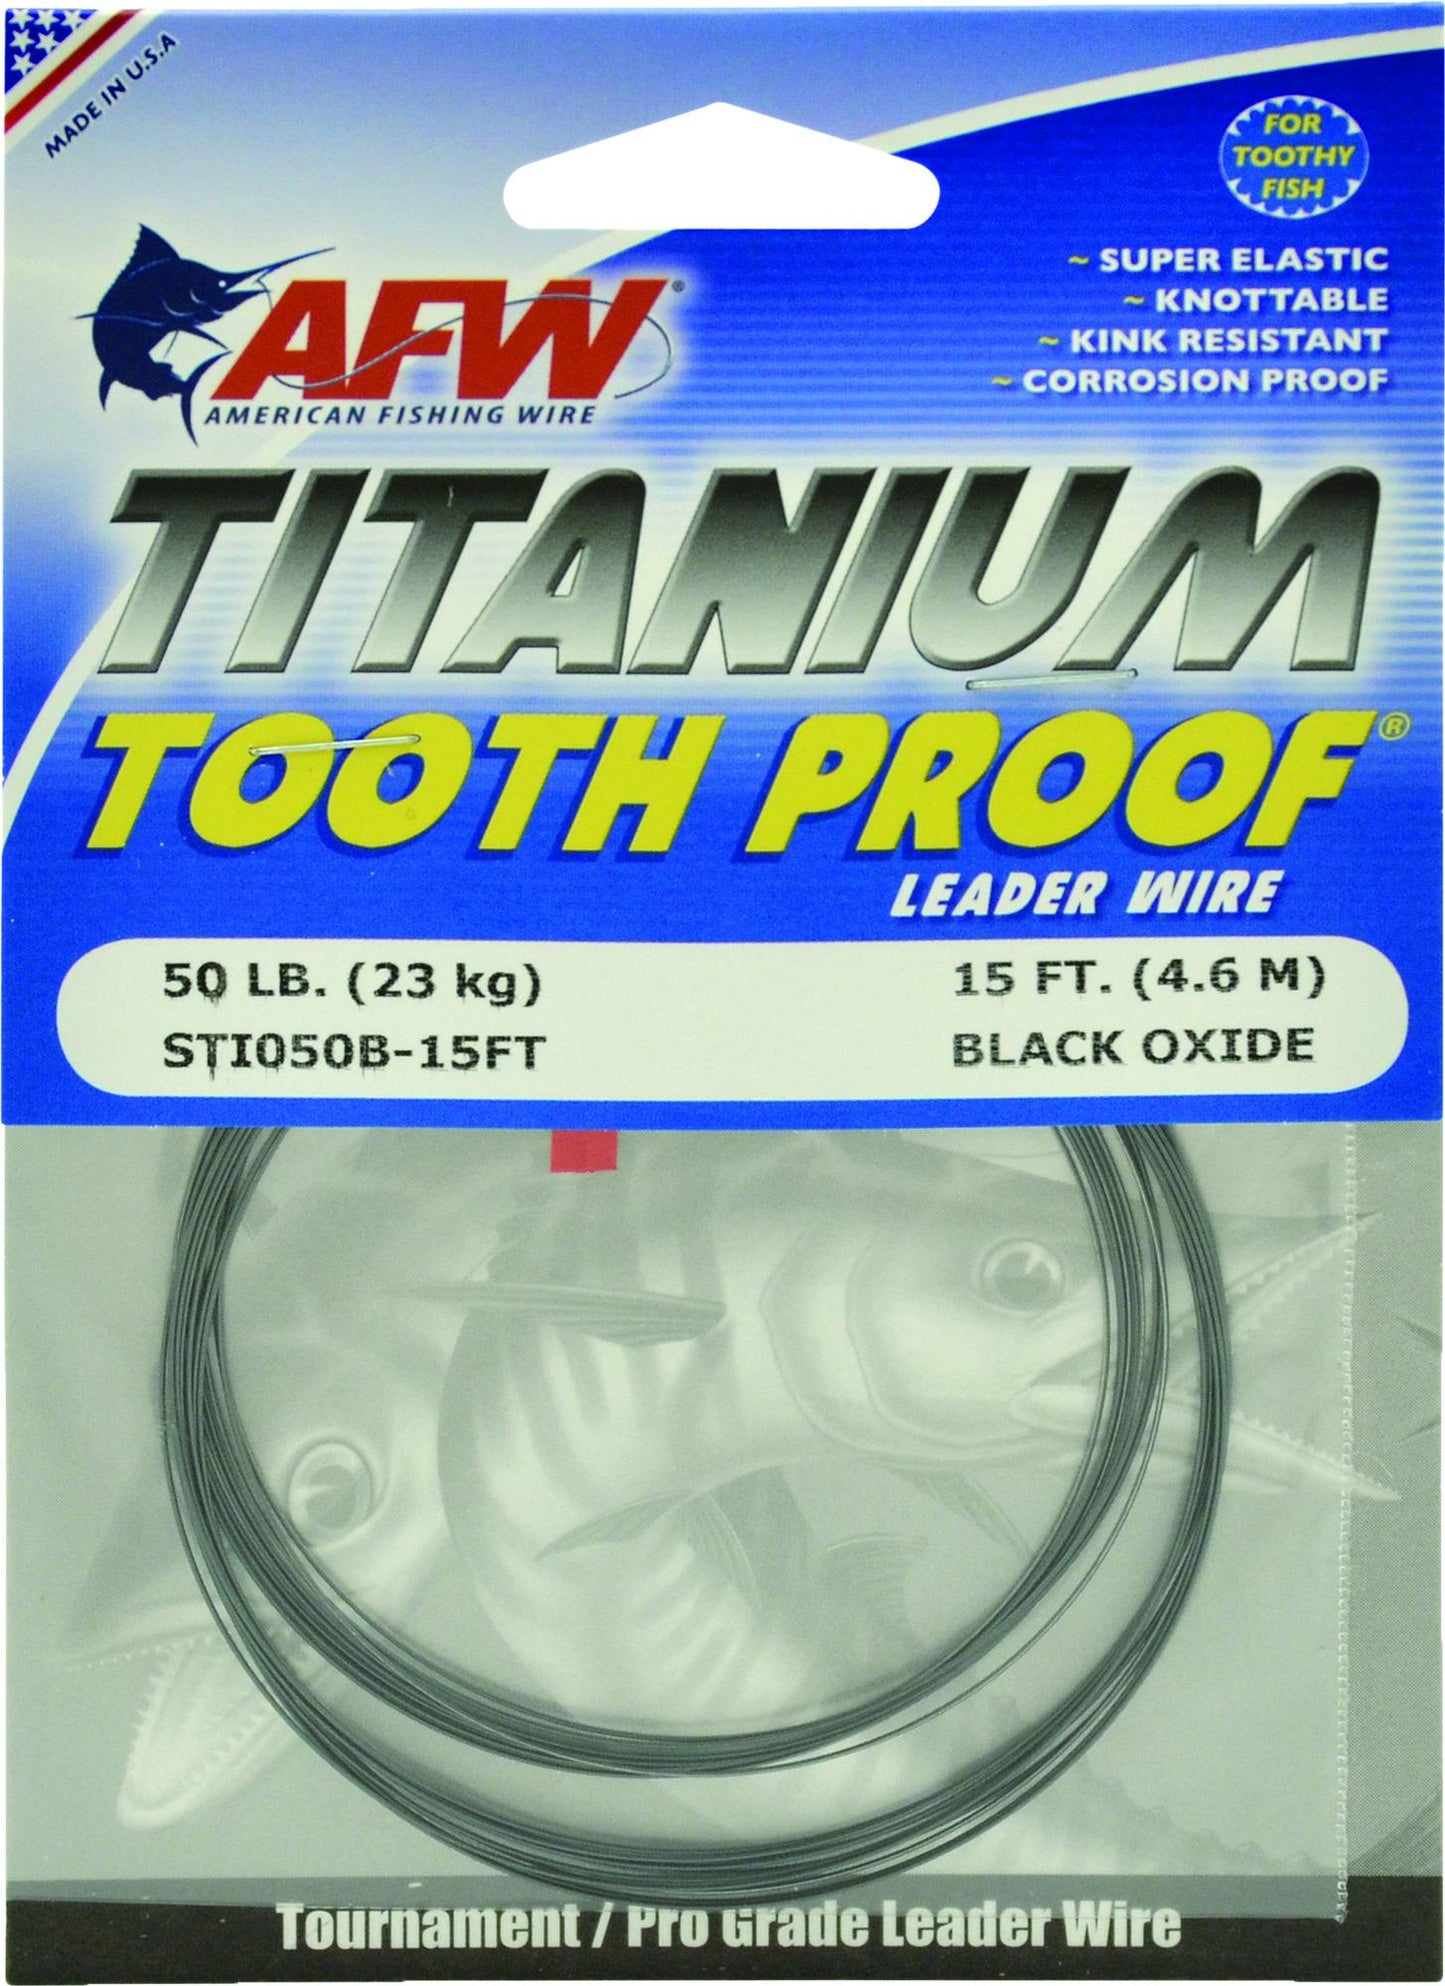 AFW STI050B-15FT Titanium Tooth Proof Single Strand Leader Wire